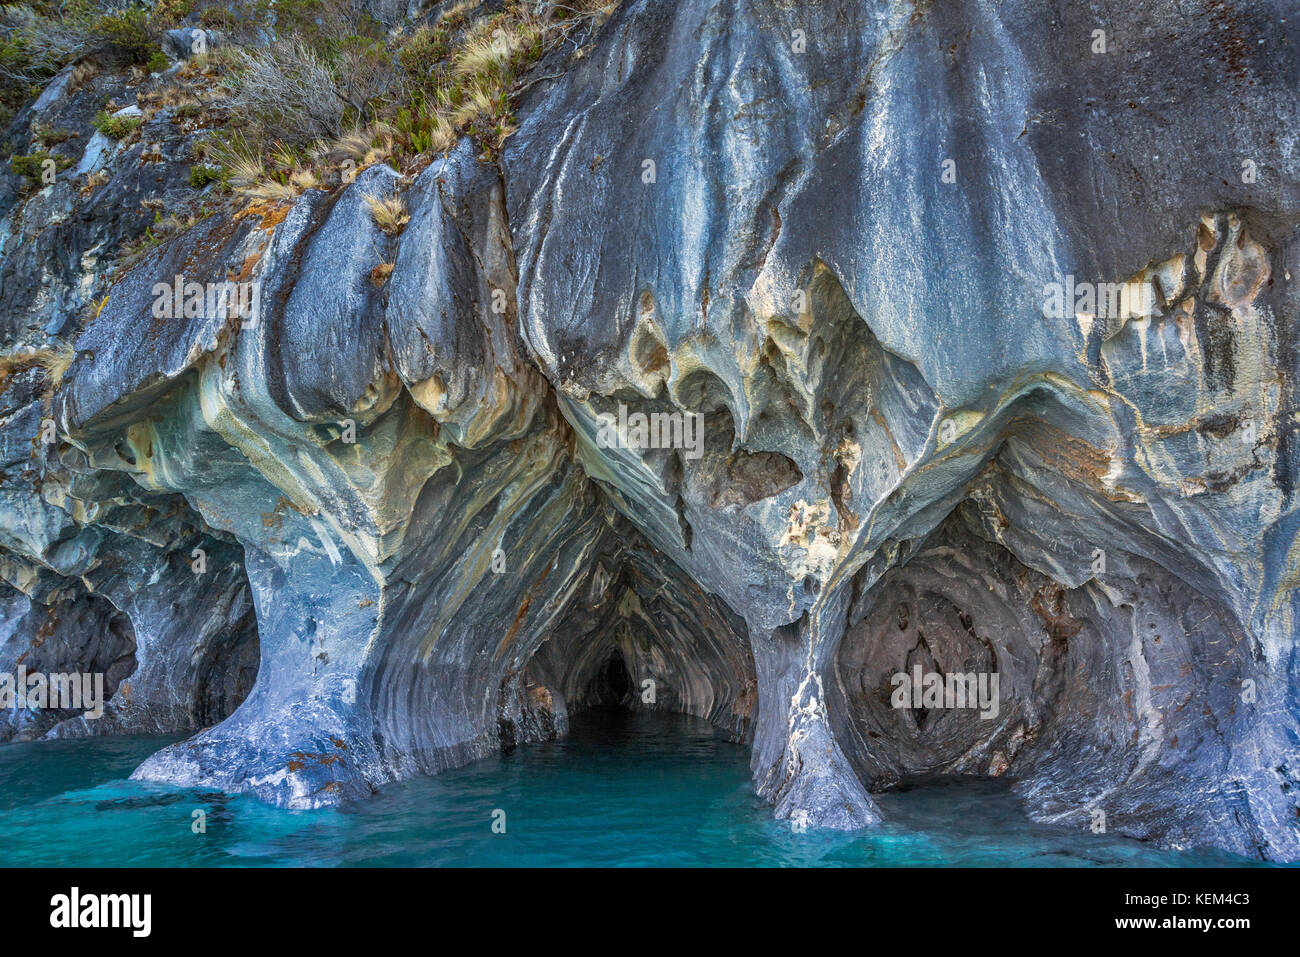 Marble Cathedral, Marble Caves, Cuevas de Marmol, Lago General Carrera,  Patagonia, Chile Stock Photo - Alamy